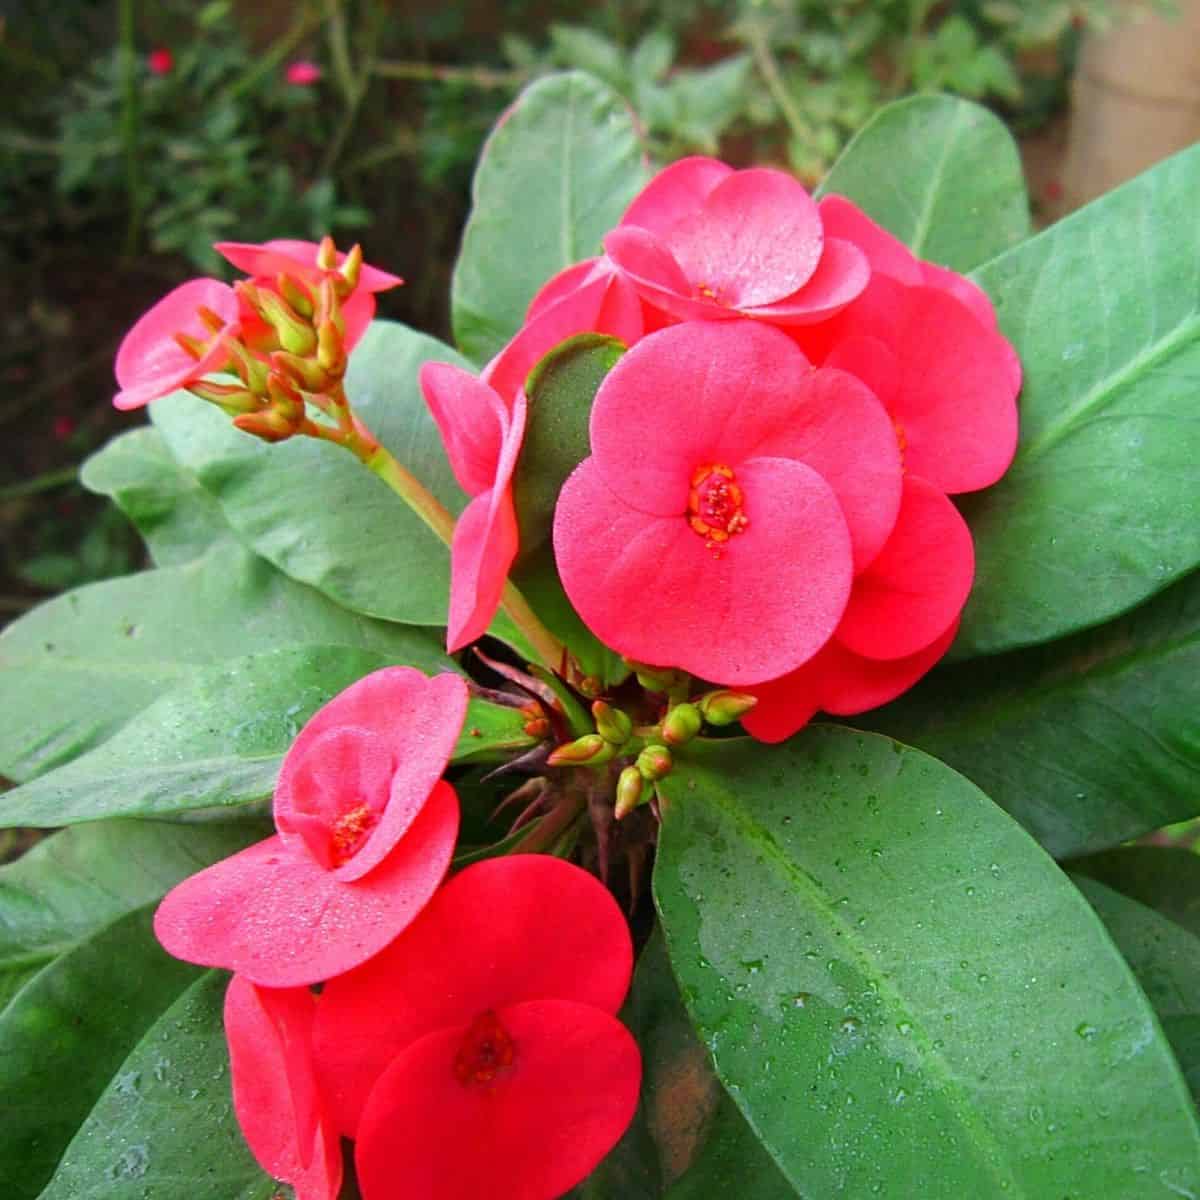 Blooming euphorbia with red flowers.